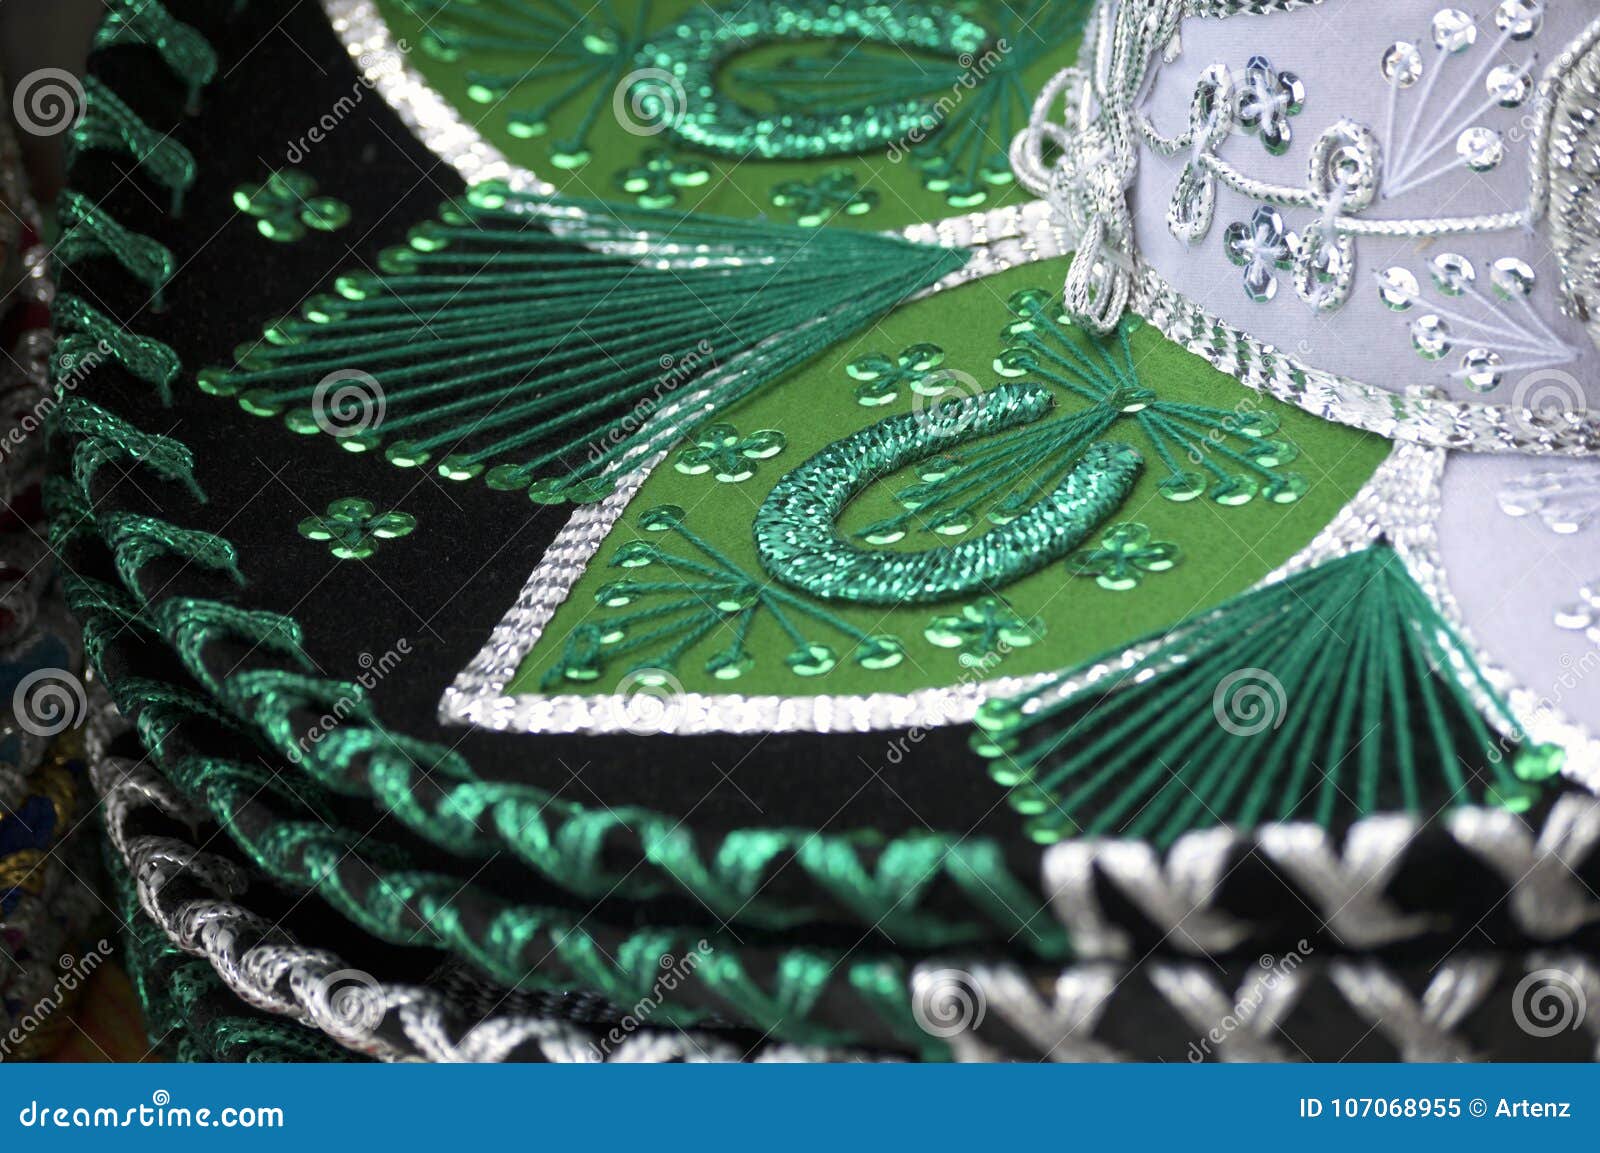 beautiful sombreros for sale in mexico